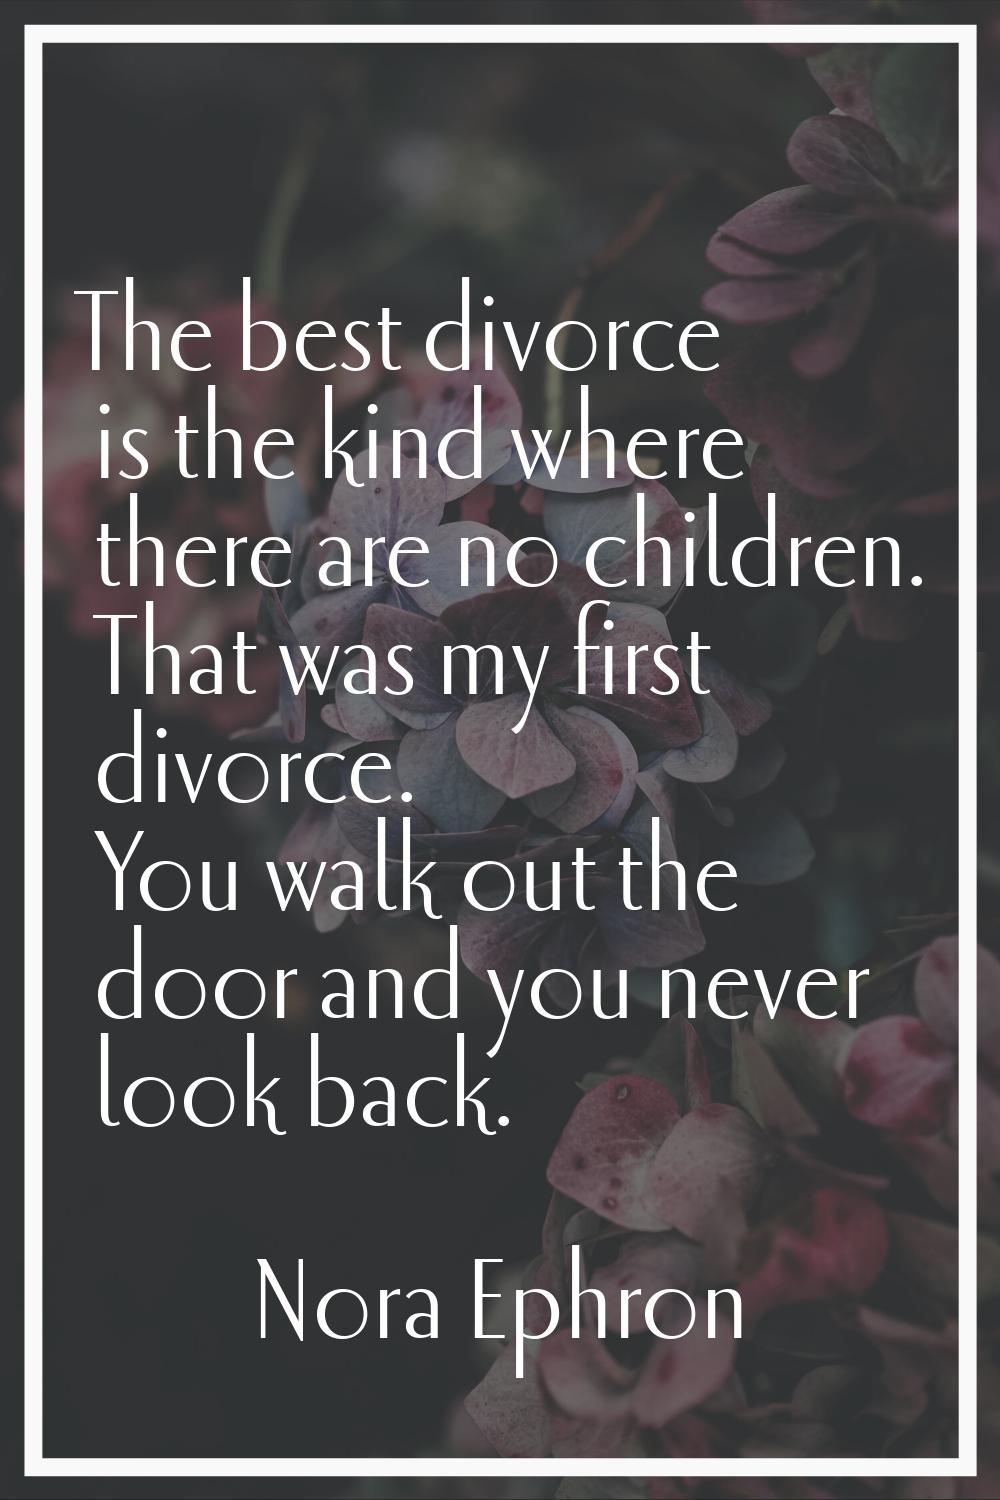 The best divorce is the kind where there are no children. That was my first divorce. You walk out t